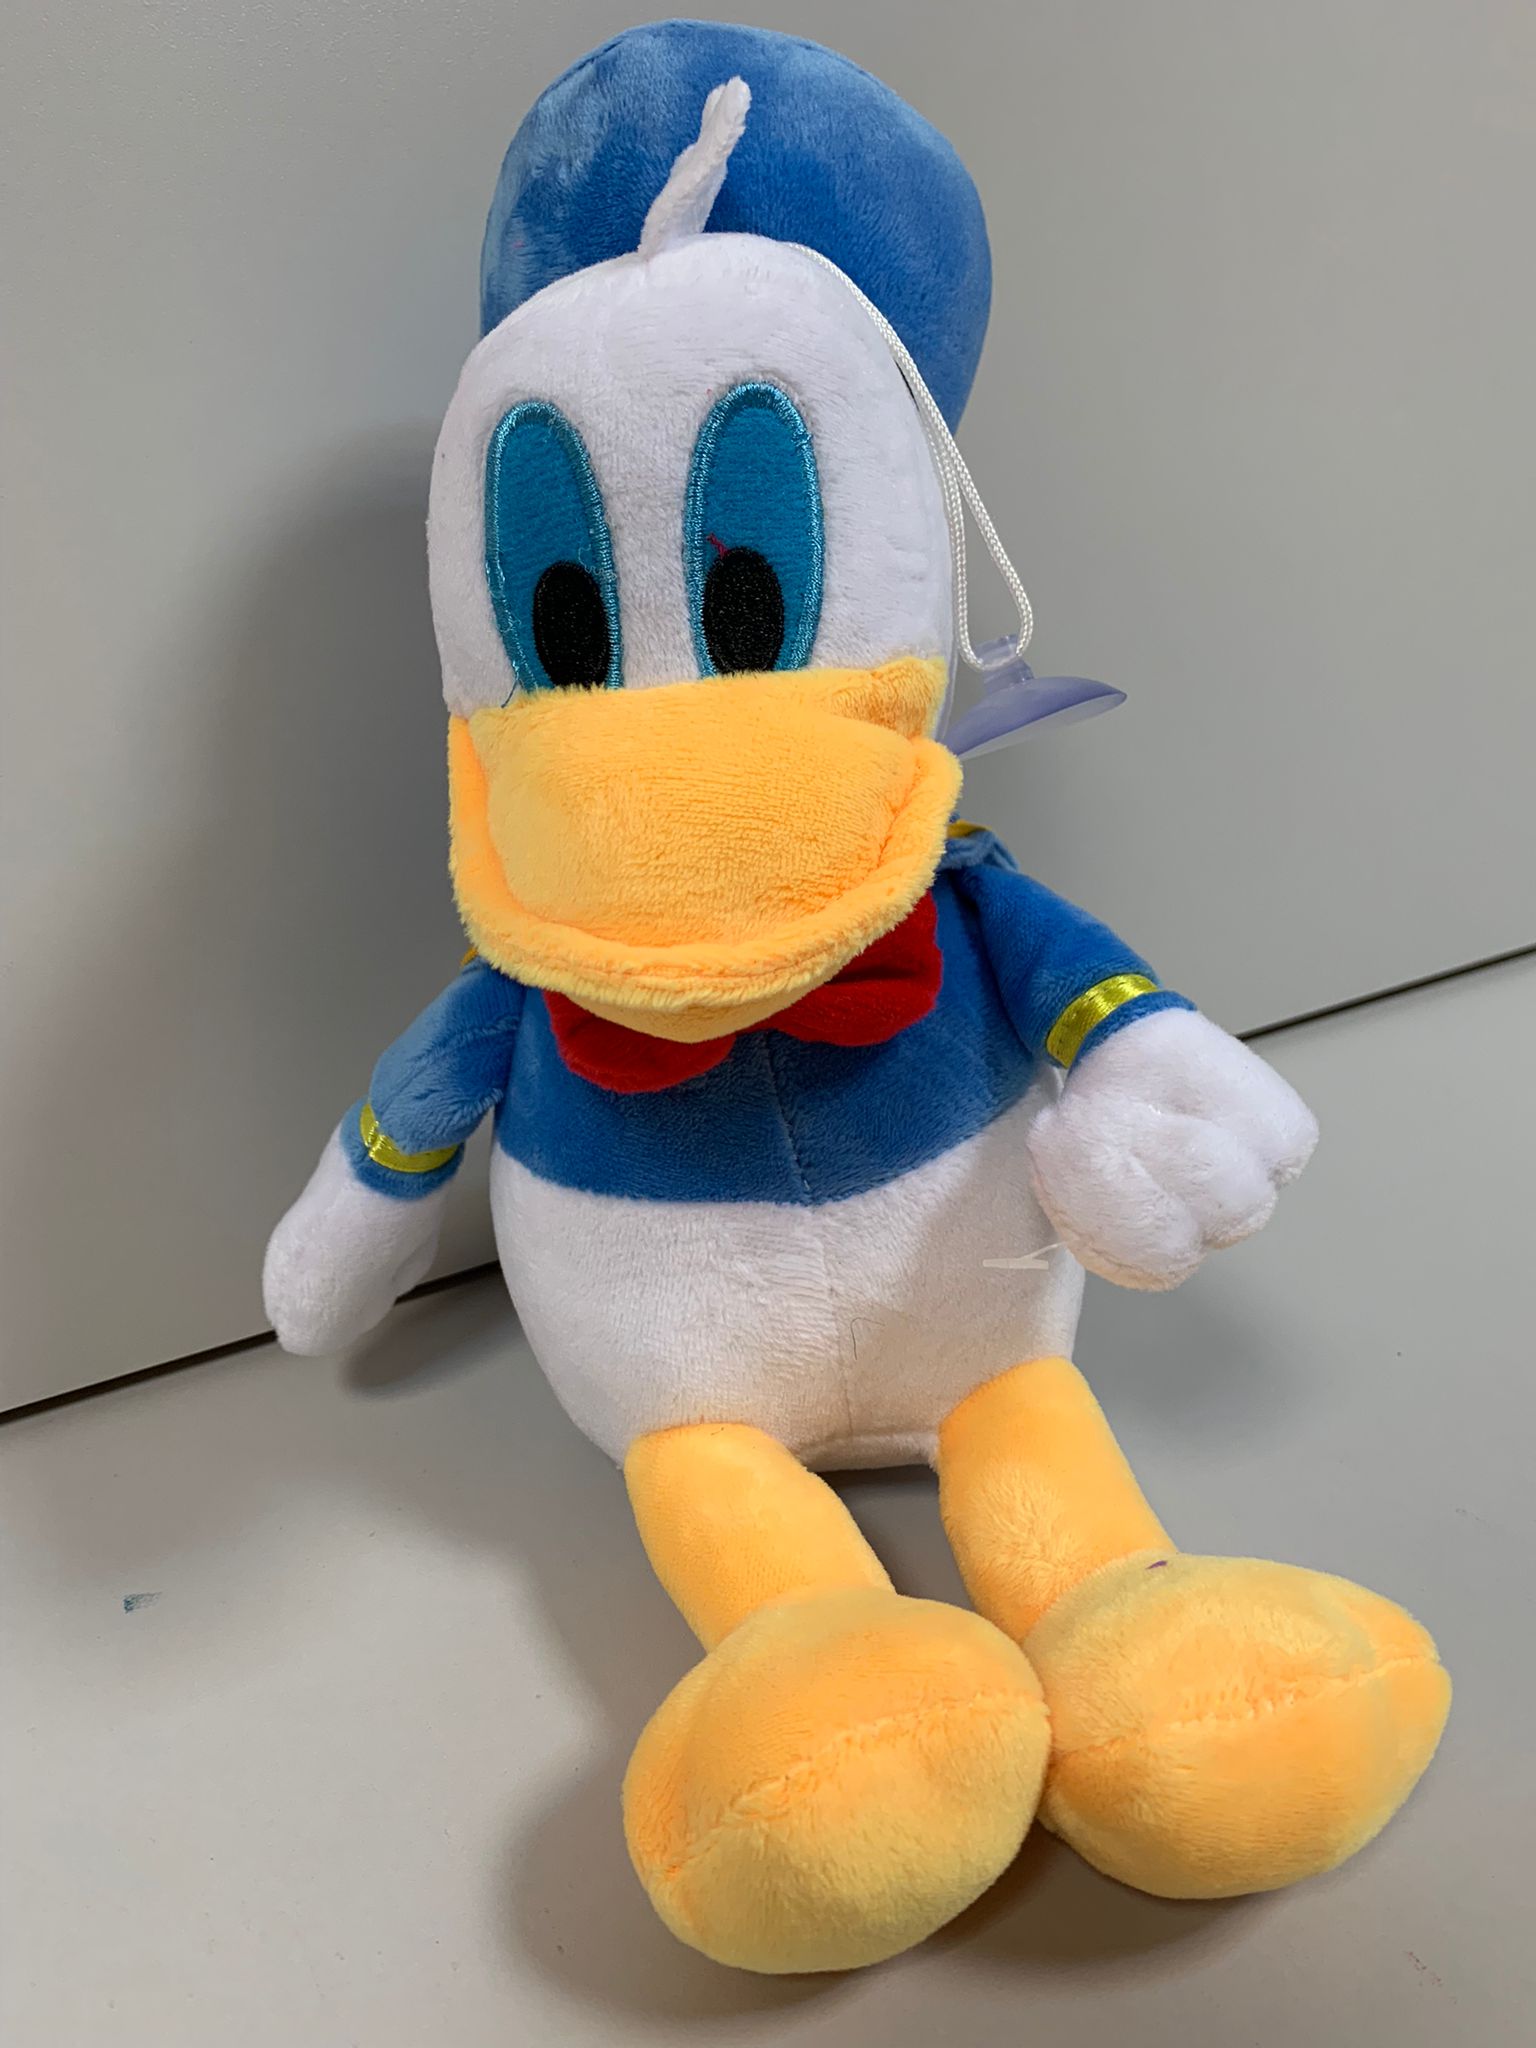 Plush character Donald from Donald the duck